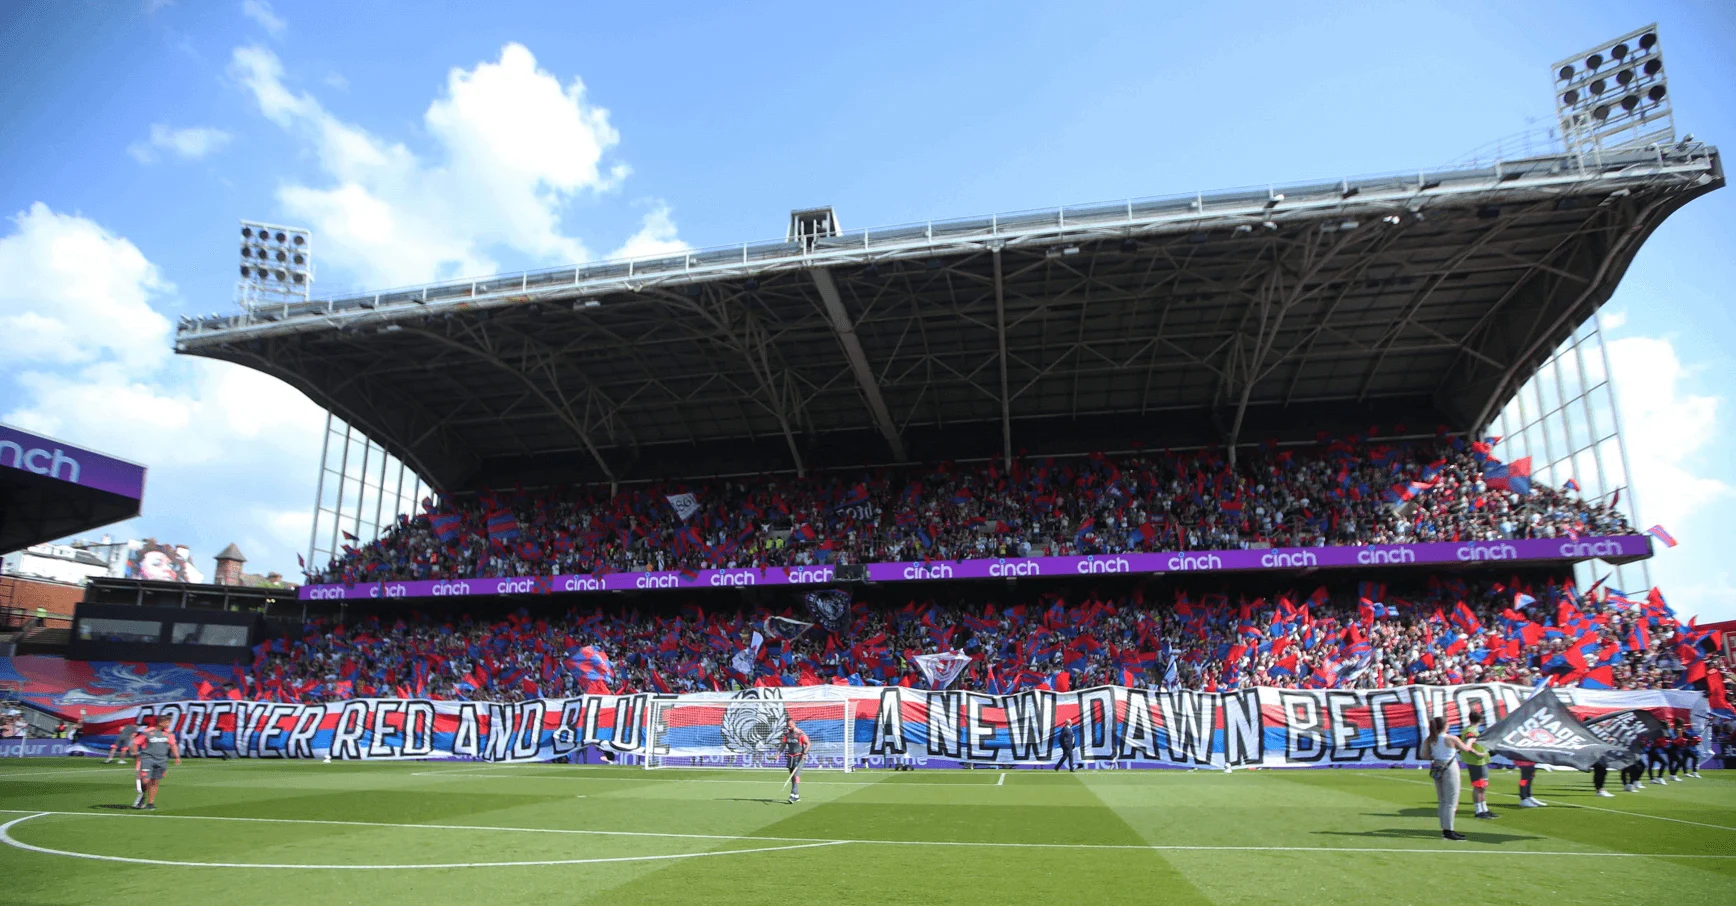 A football stadium stand is packed with fans flying flags high behind the goal. A blue sky shines overhead. A banner lines the lower stand and reads 'Forever red and blue, a new dawn beckons'.